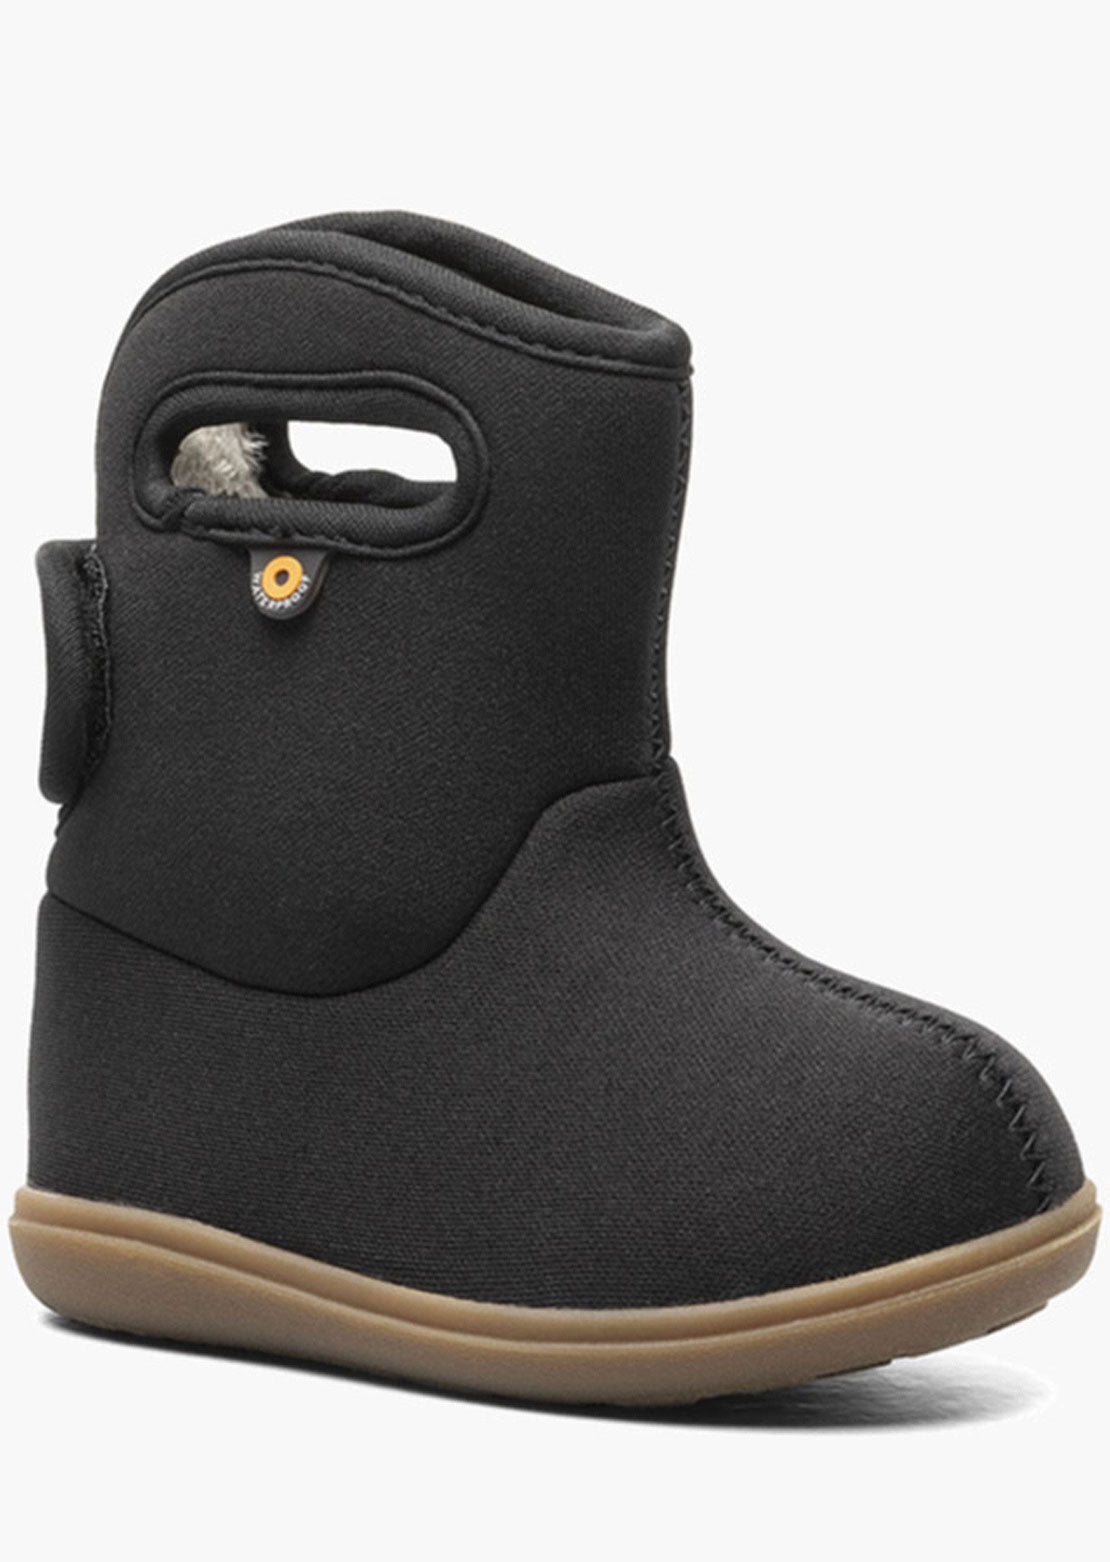 Bogs Toddler II Solid Boots Black Multi